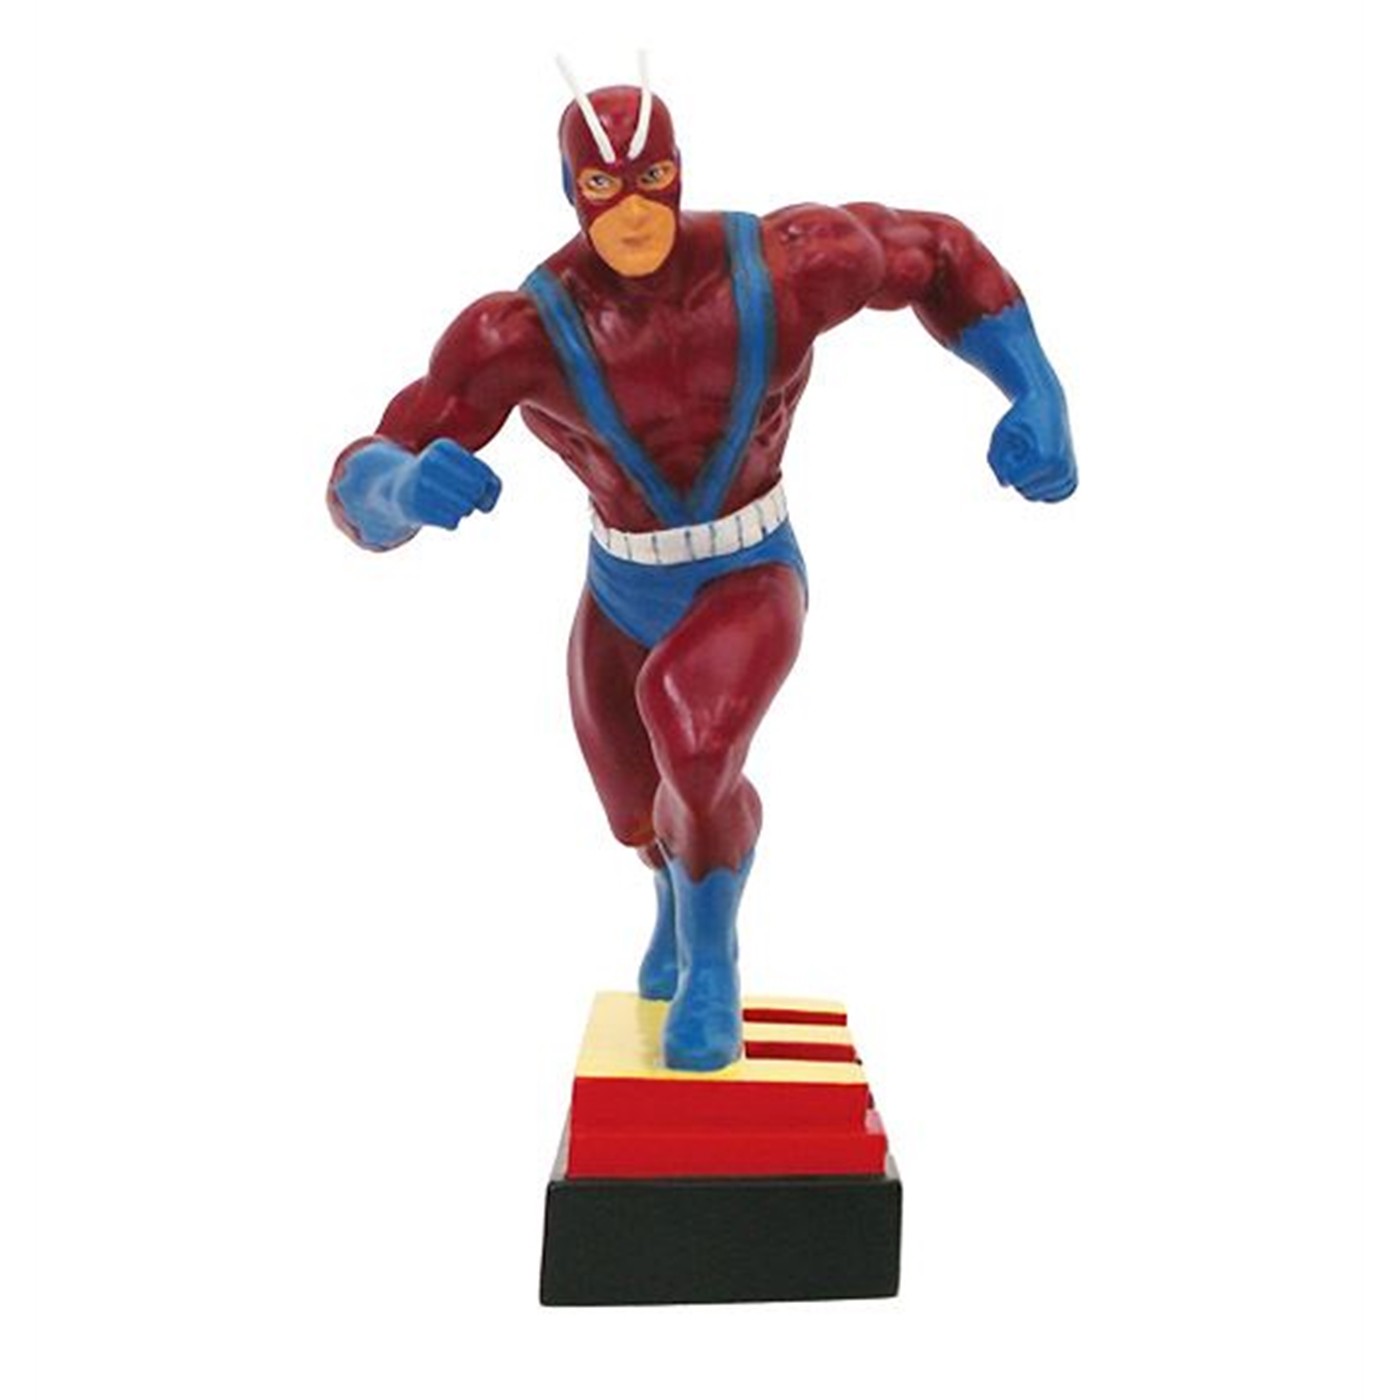 Giant Man Avengers "E" Figural Paperweight